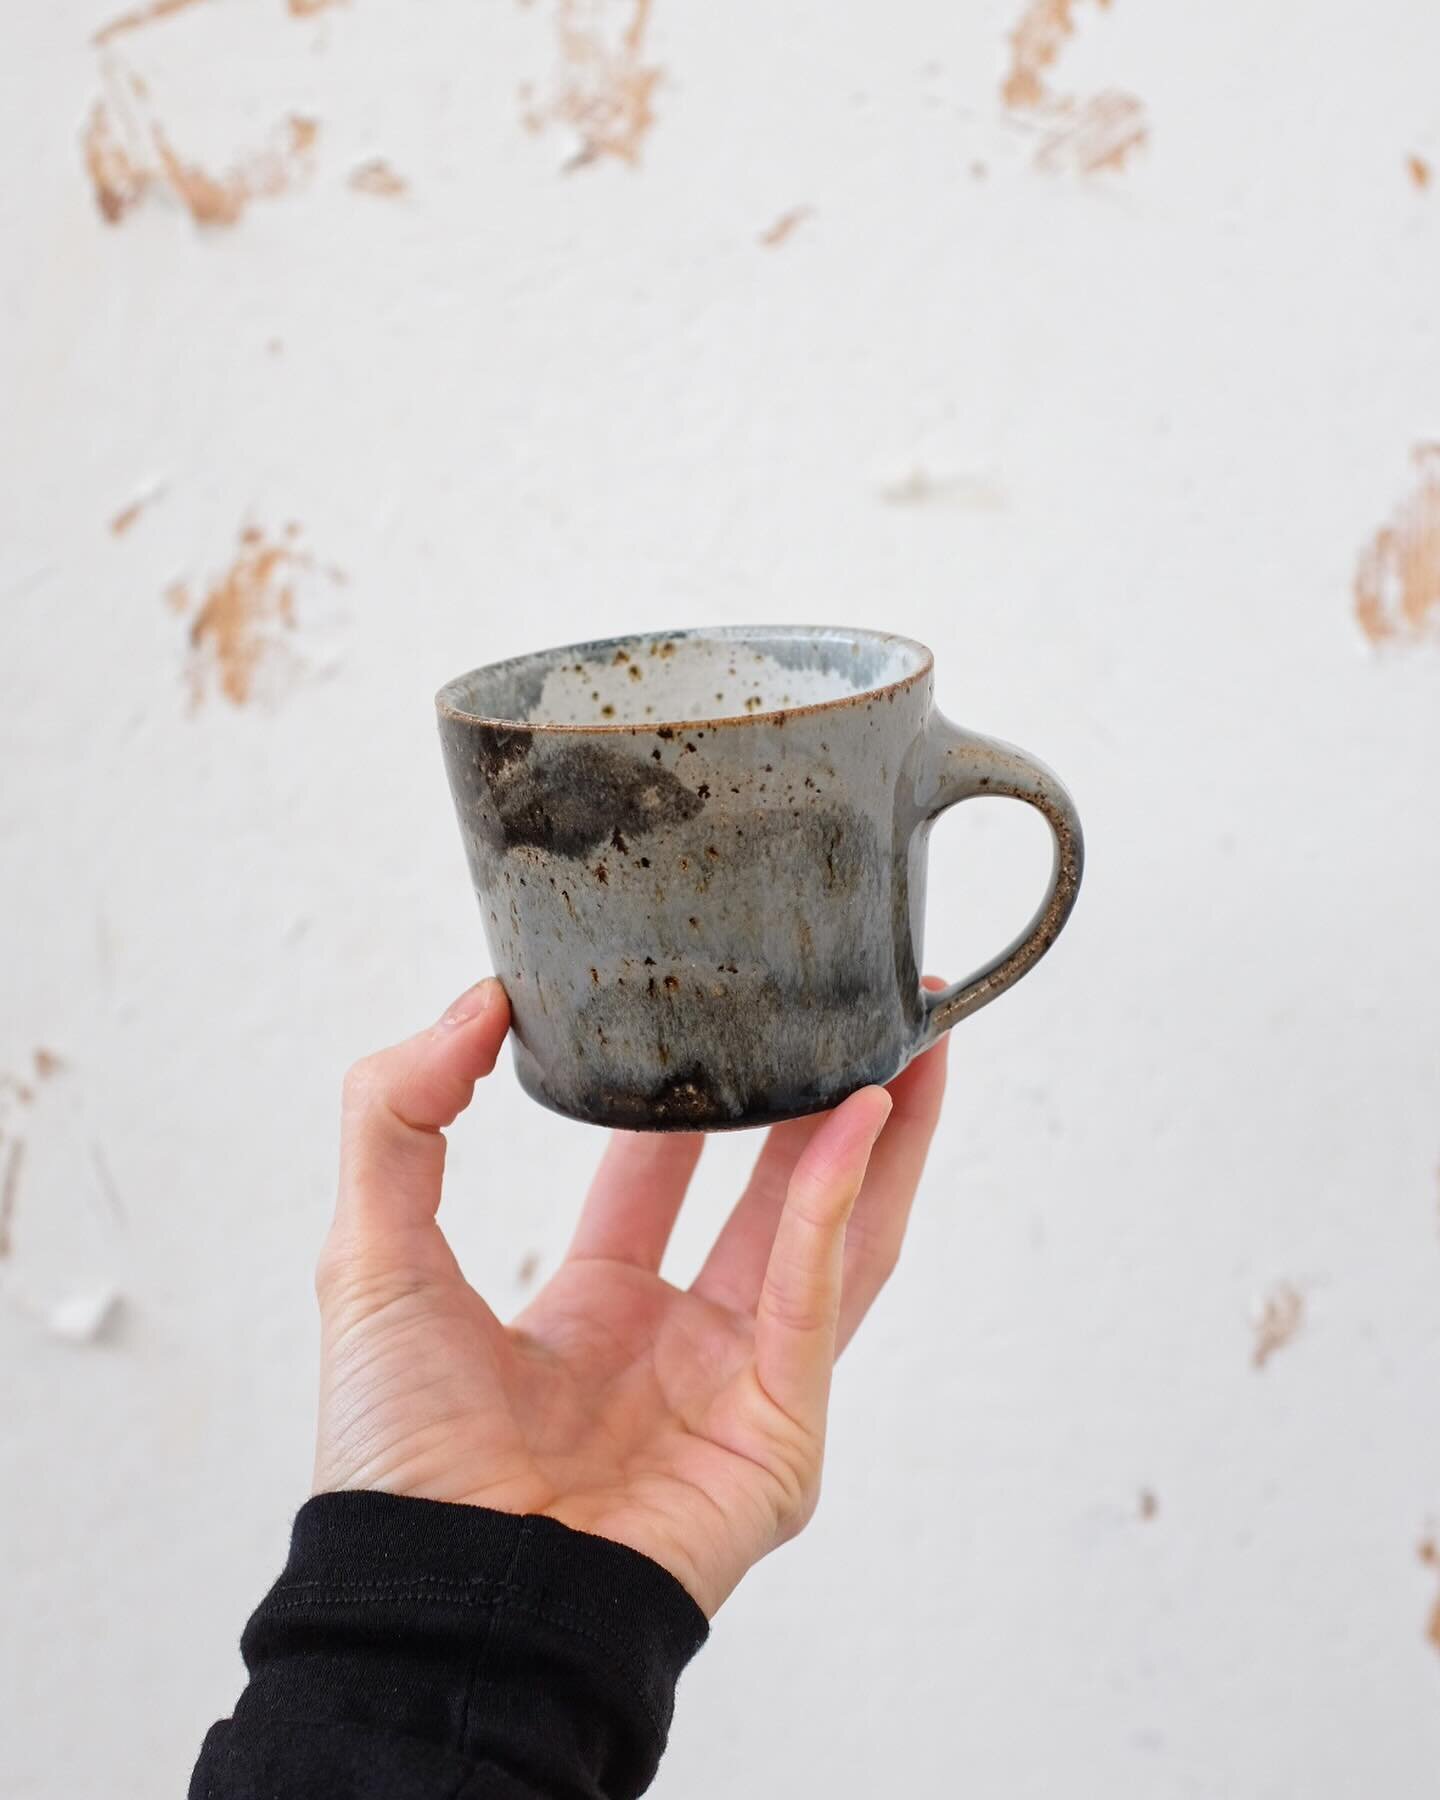 A smaller storm mug for your morning coffee.